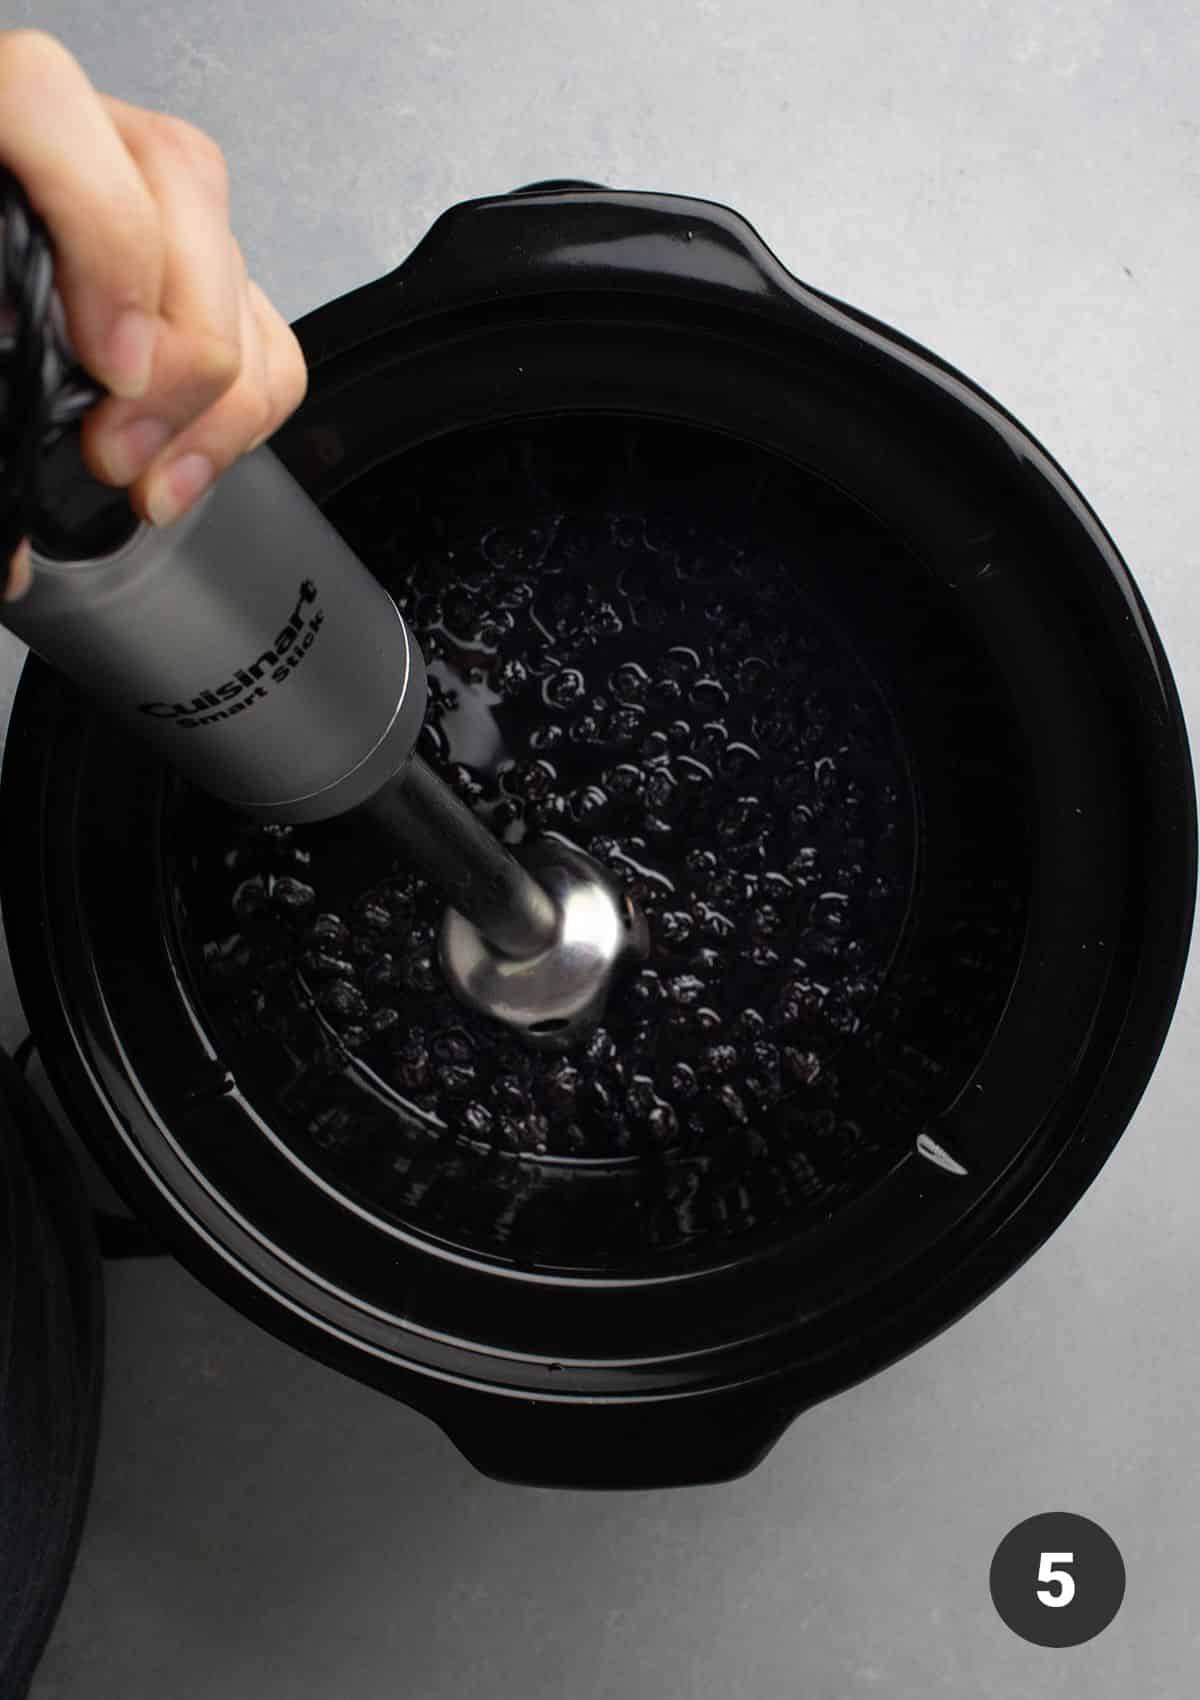 Pulsing cooked blueberries with an immersion blender.